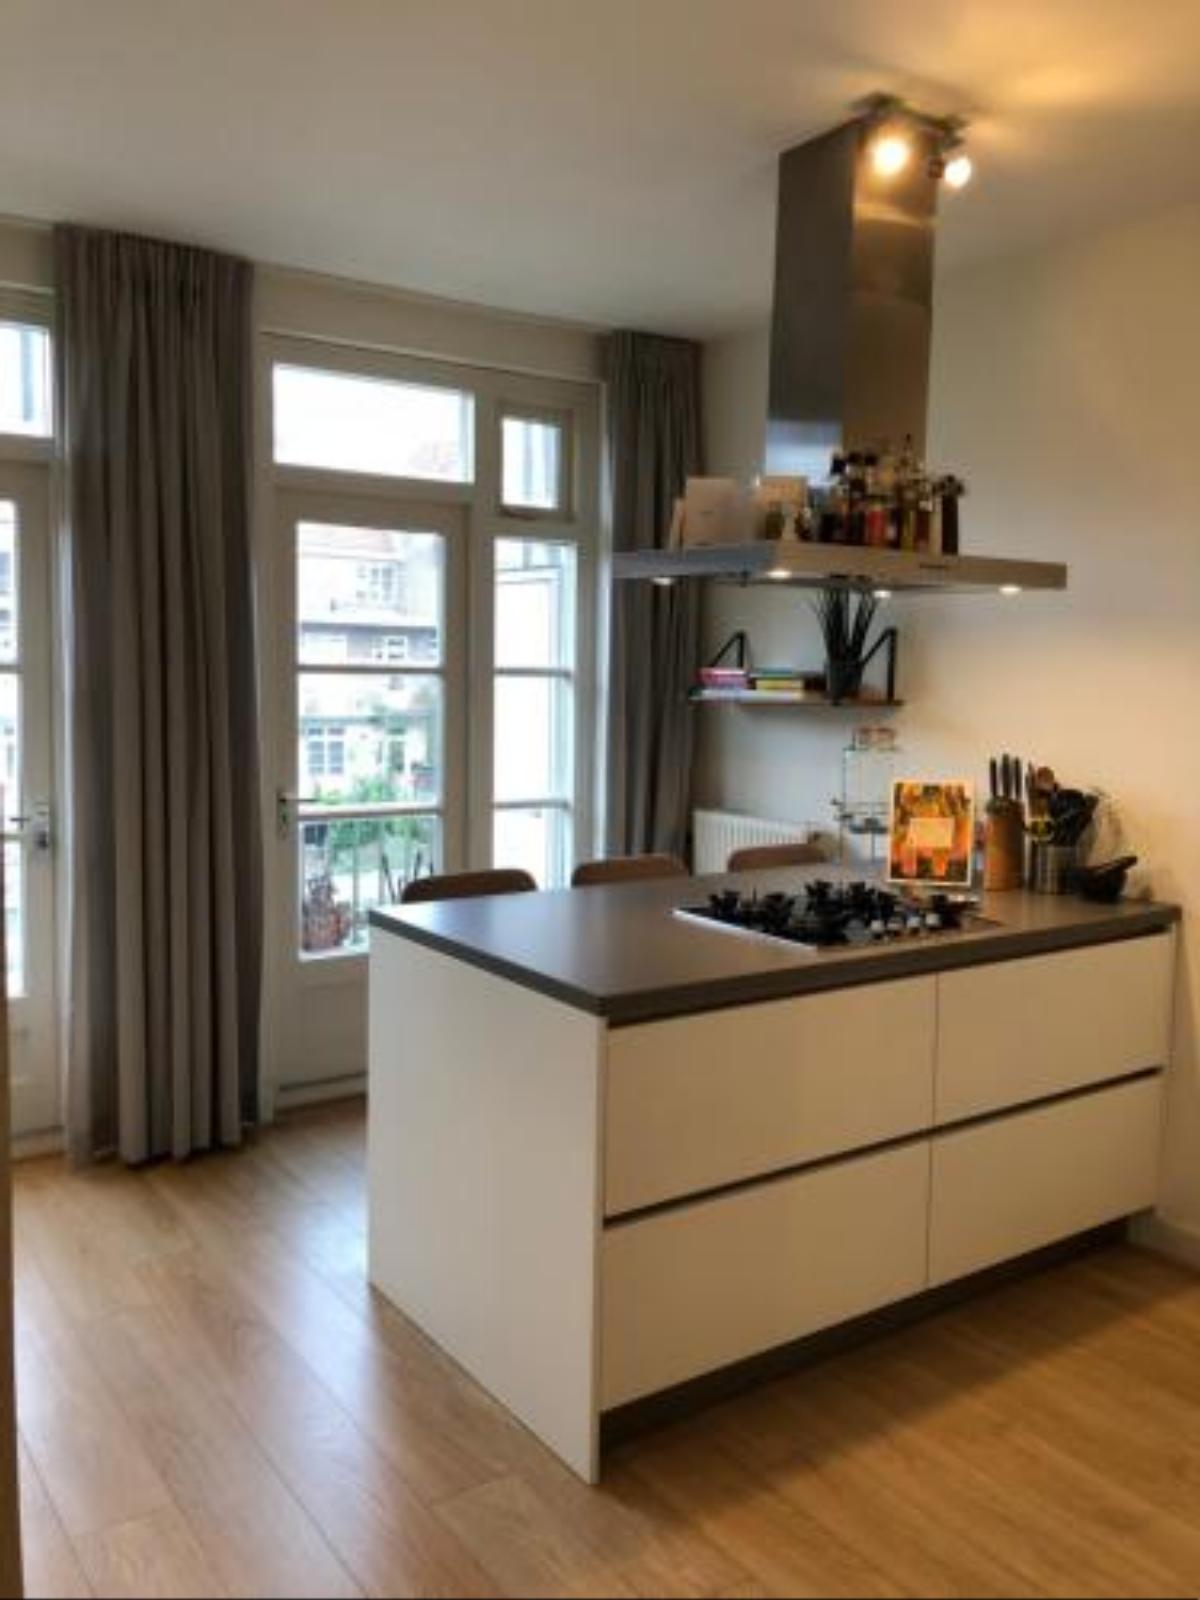 Spacious 100m2 apartment with balcony in Amsterdam Hotel Amsterdam Netherlands